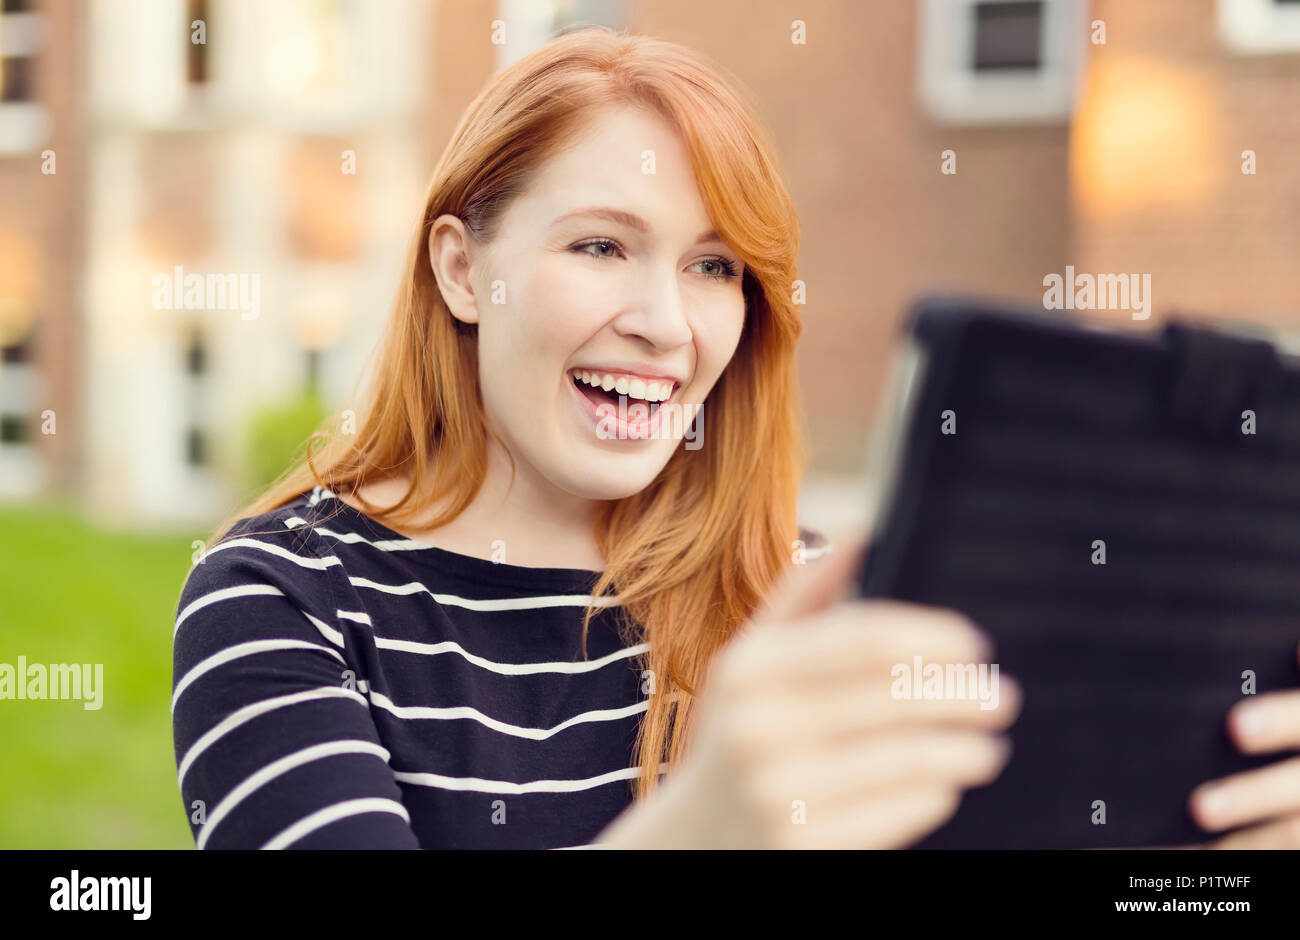 A young woman with red hair smiles big while looking at a tablet; Edmonton, Alberta, Canada Stock Photo